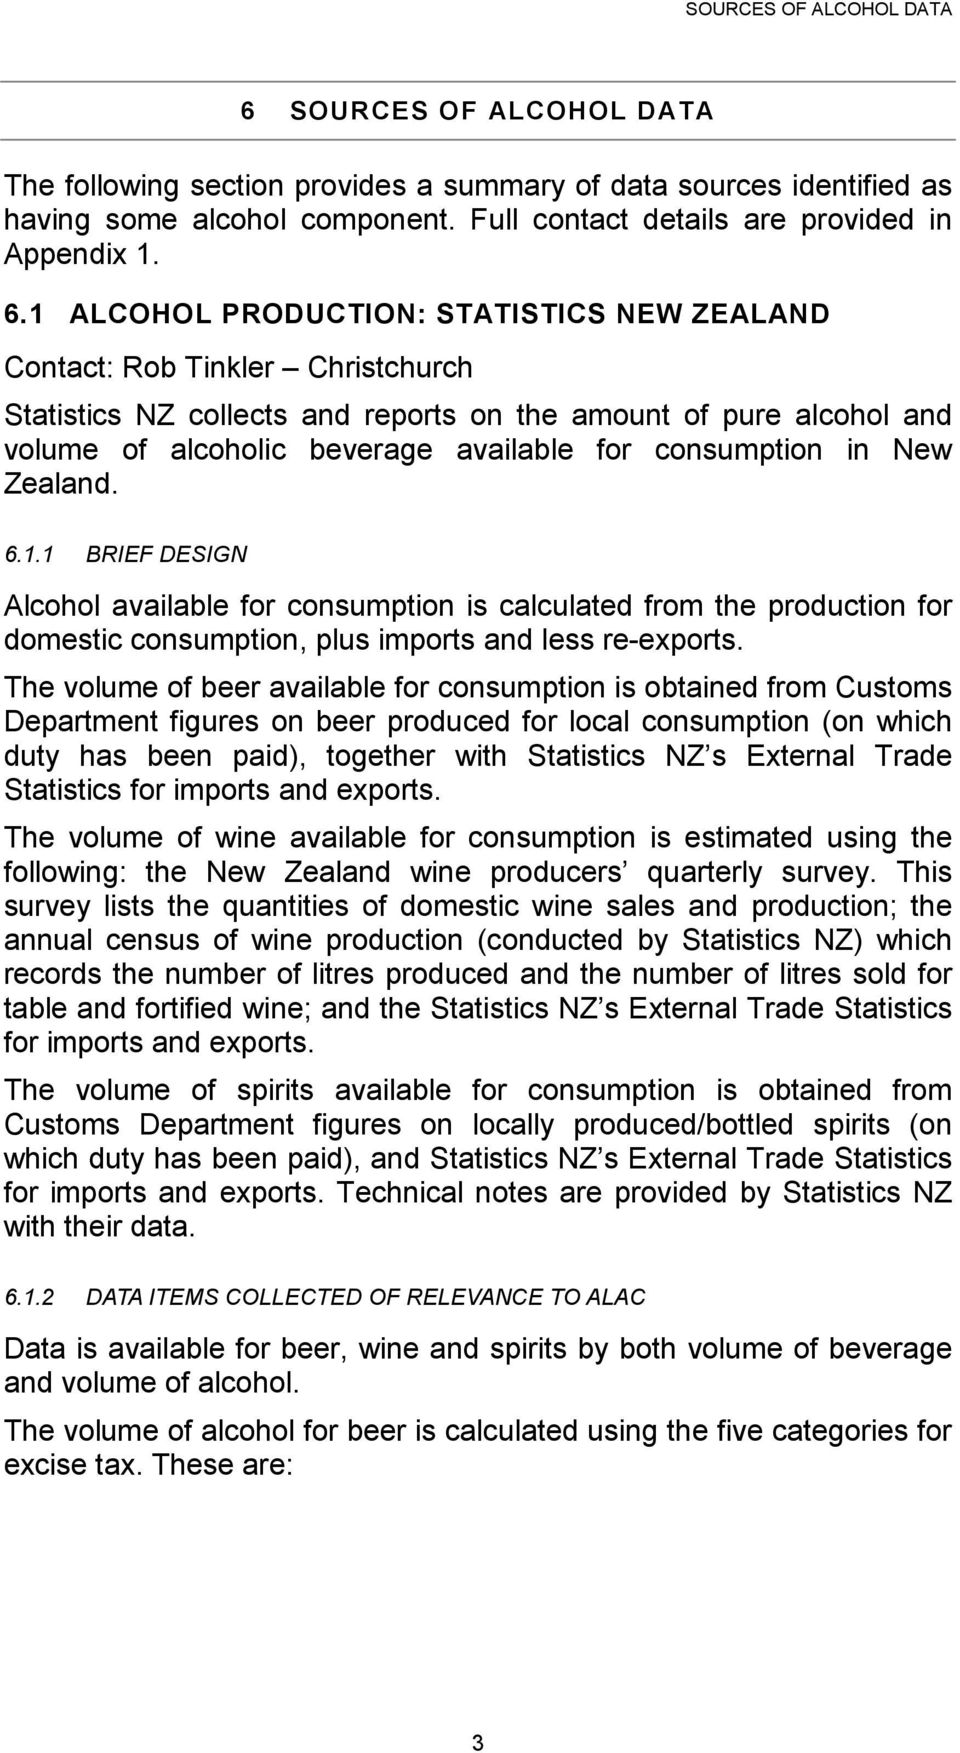 consumption in New Zealand. 6.1.1 BRIEF DESIGN Alcohol available for consumption is calculated from the production for domestic consumption, plus imports and less re-exports.